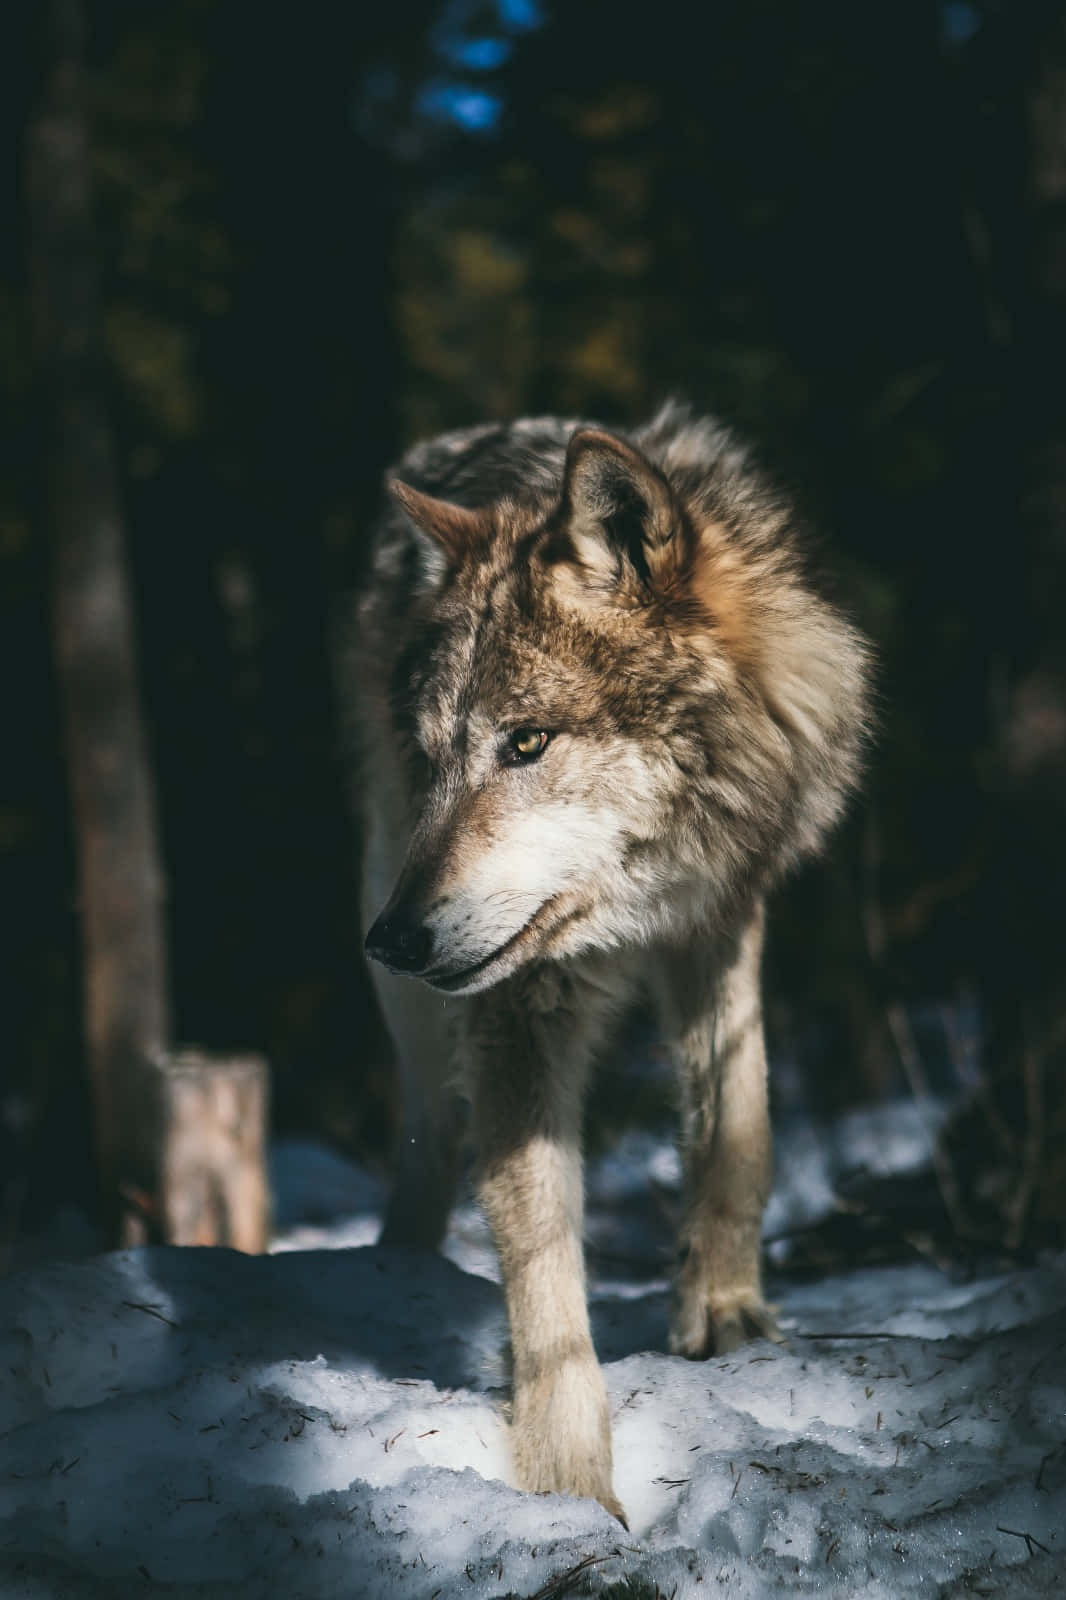 A striking grey wolf looking intently at the camera.